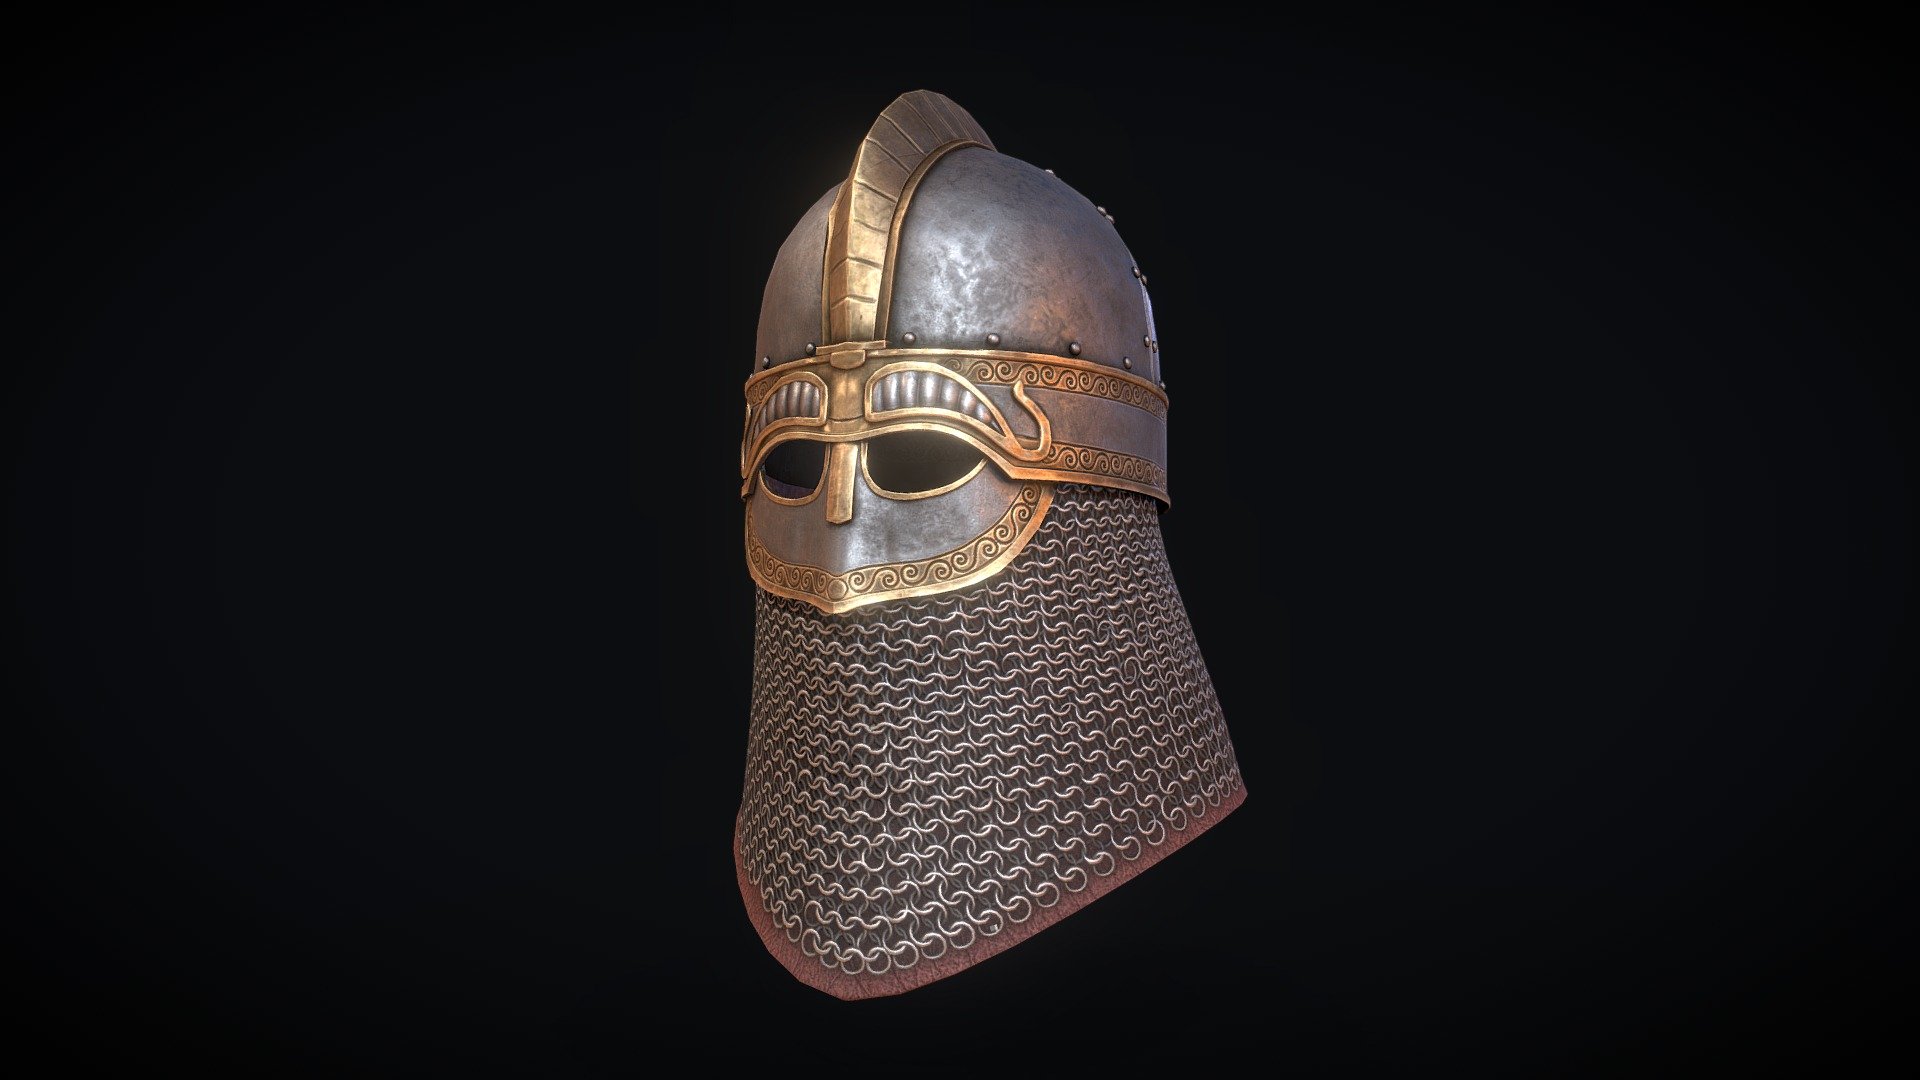 afther watching the northman i realy got into viking age stuff again.
So i made a helmet losely based on a lot of pictures i found so its not realy historicaly accurate.
The chainmail and engraving is modeled for a change so that was quite a challange.

The helmet is made for one of my bannerlord mods - Viking Helmet - 3D model by adamnsexyname (Pieter) (@adamnsexyname) 3d model